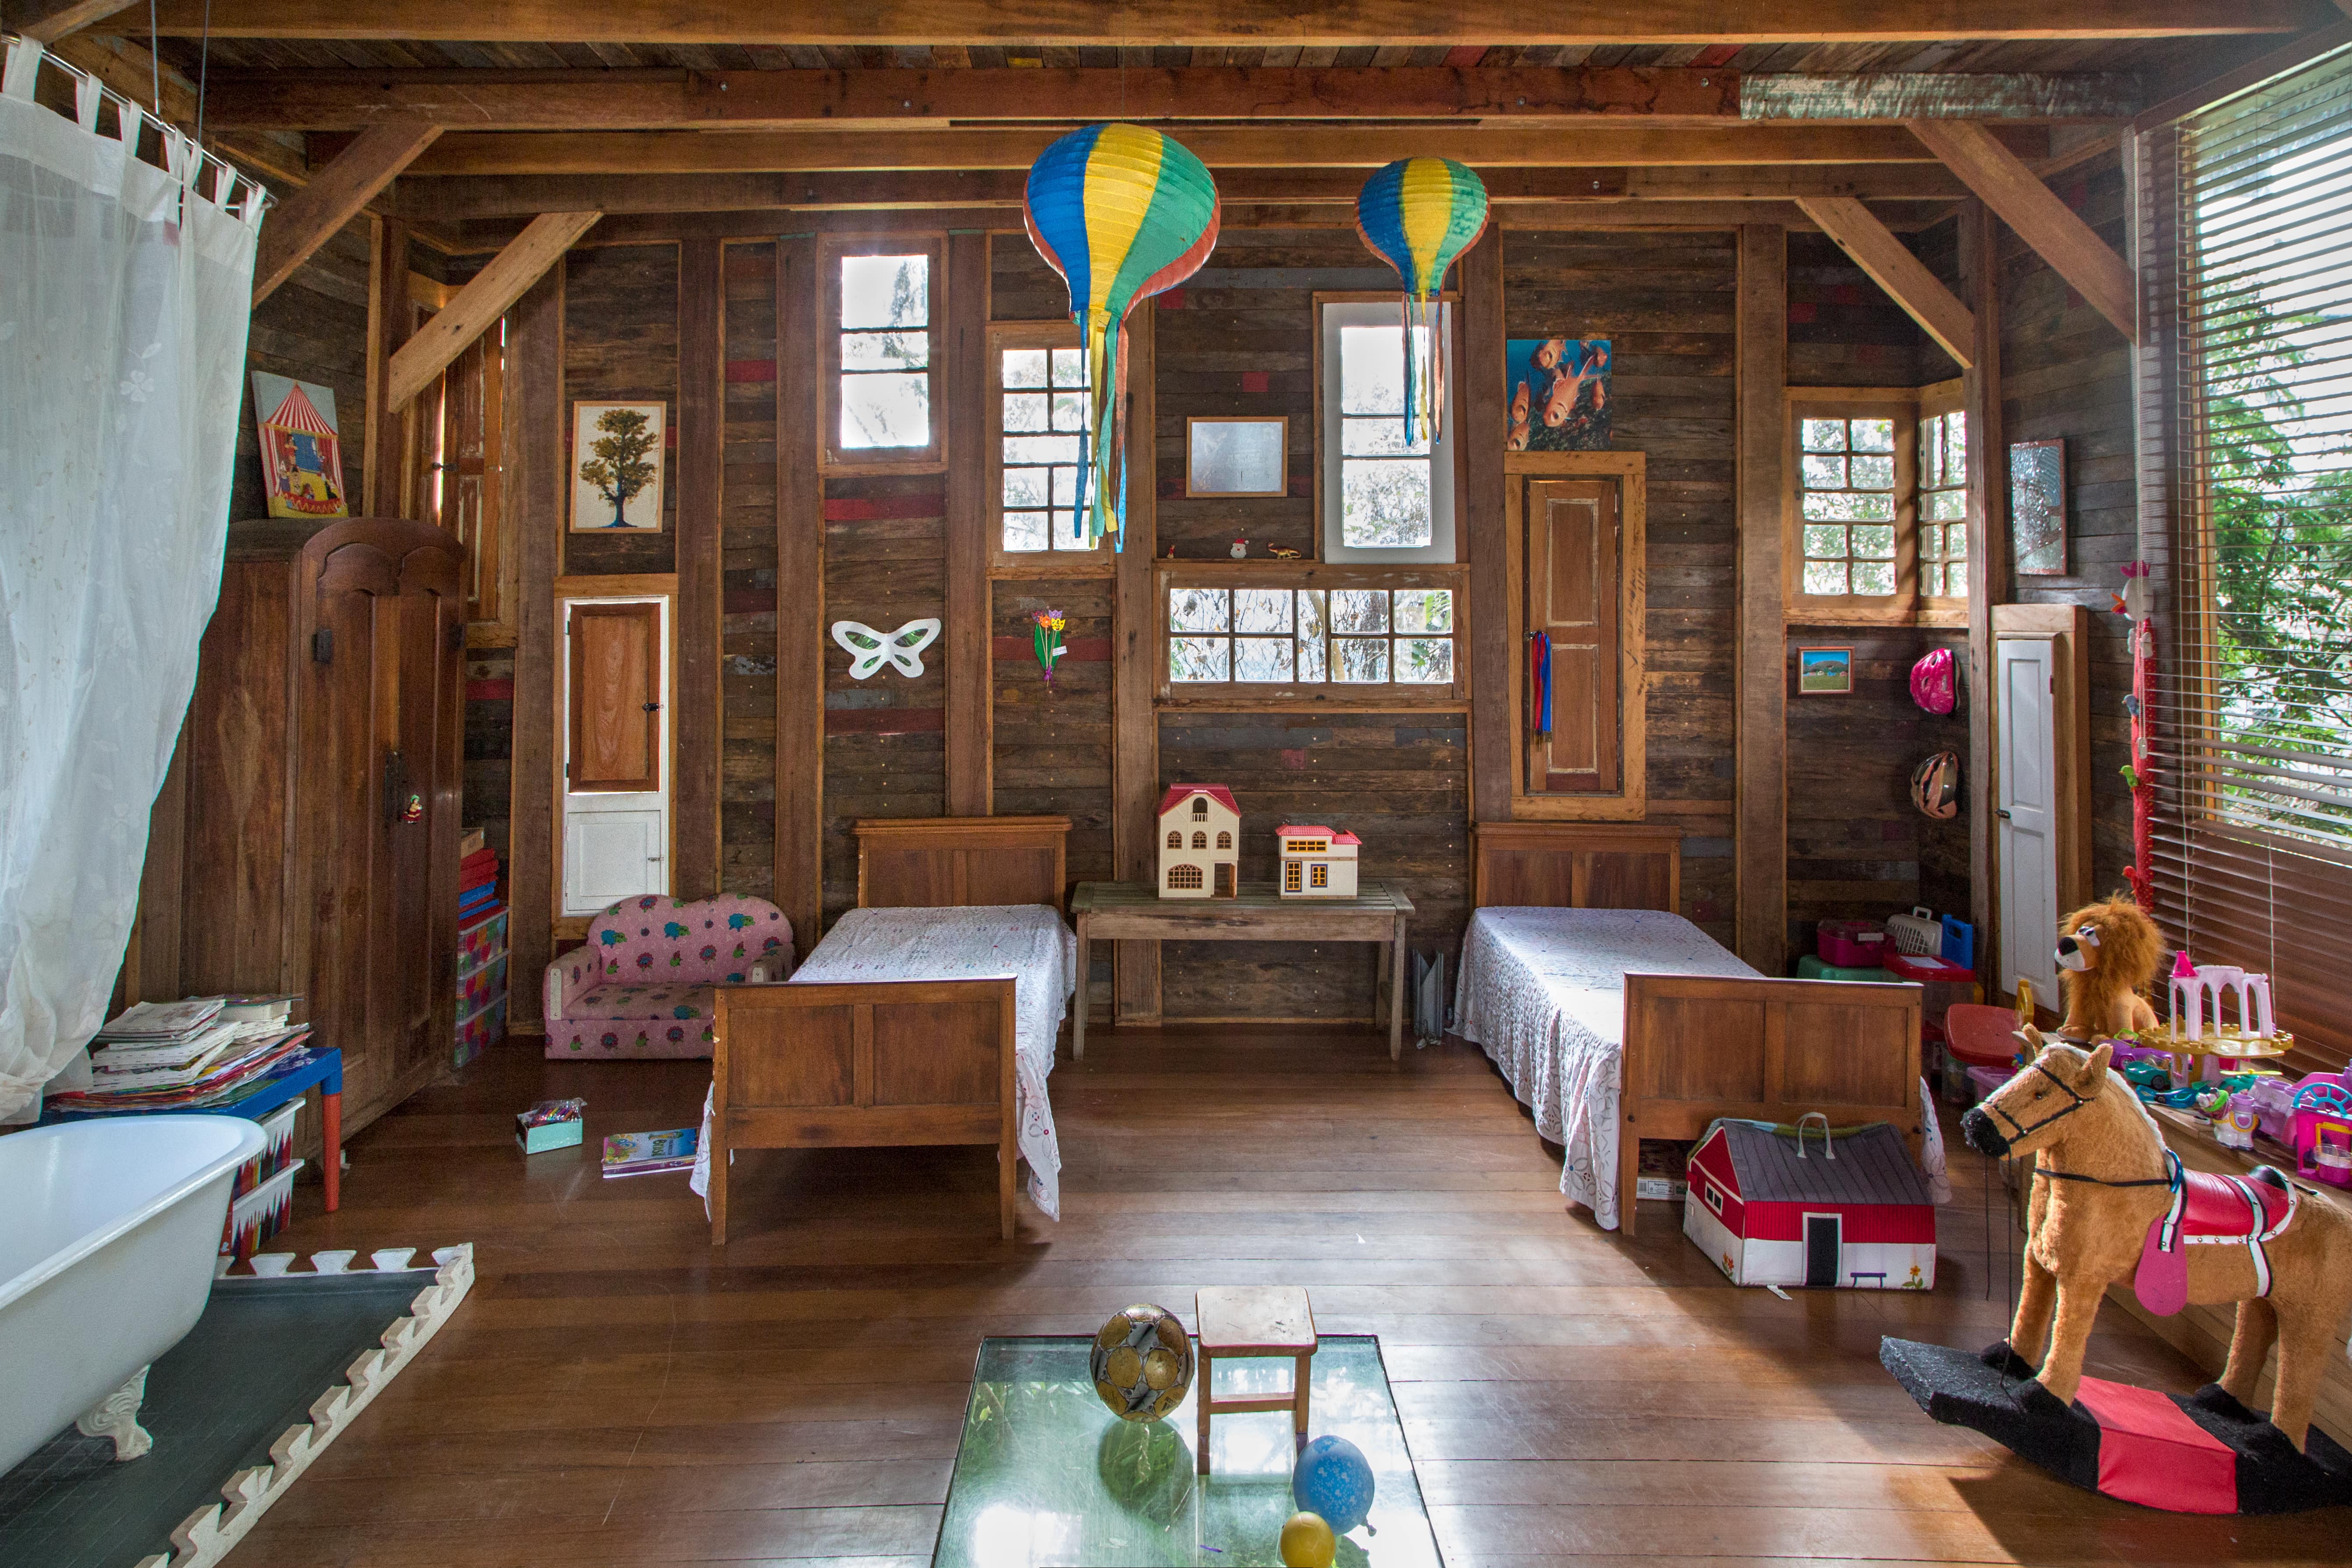 The interior of the children's room is dominated by wood material